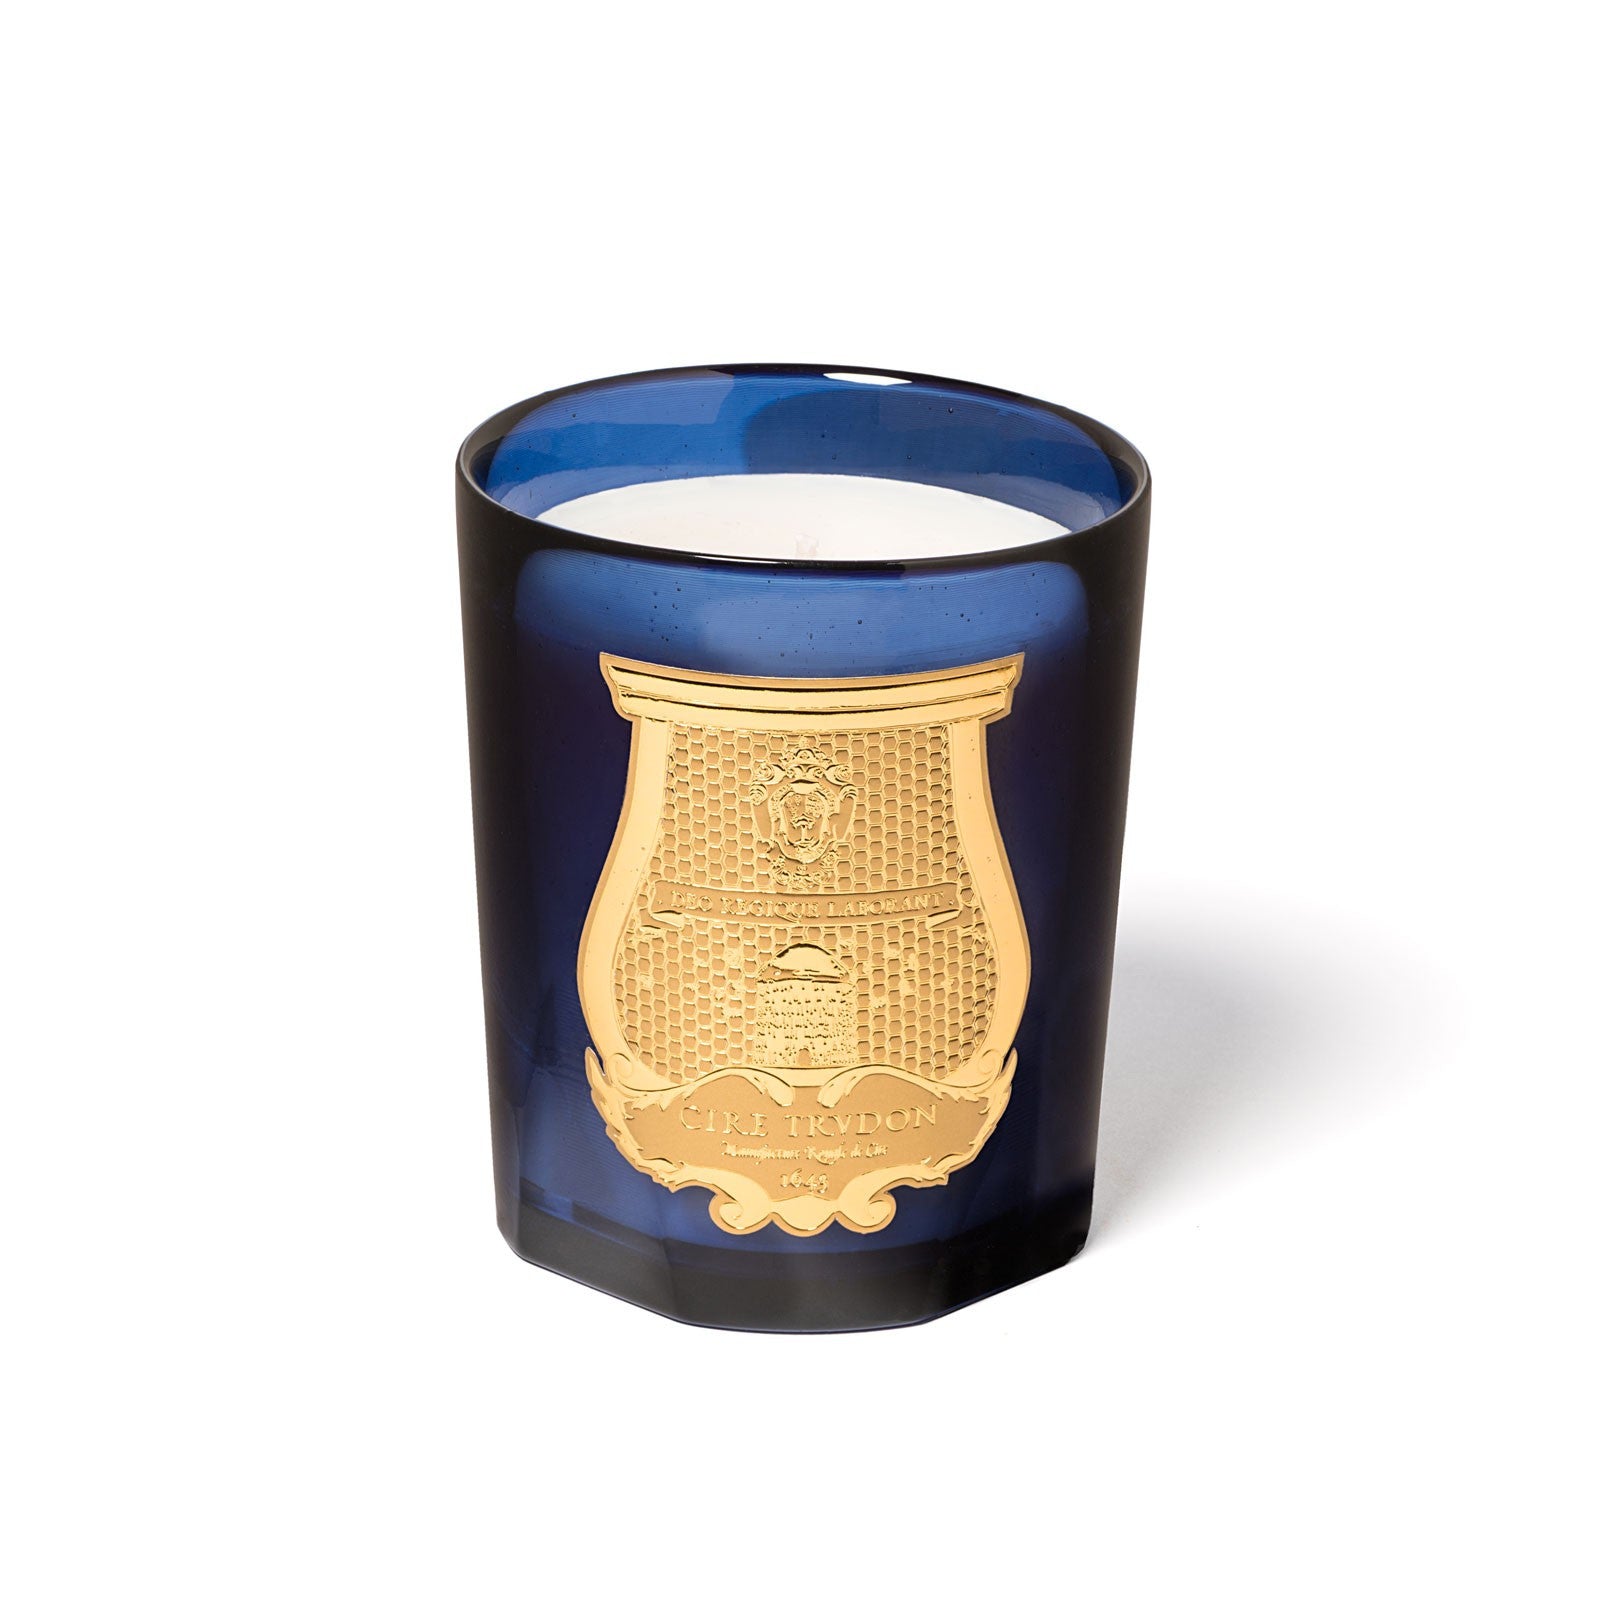 Limited edition Estérel candle by Cire Trudon.